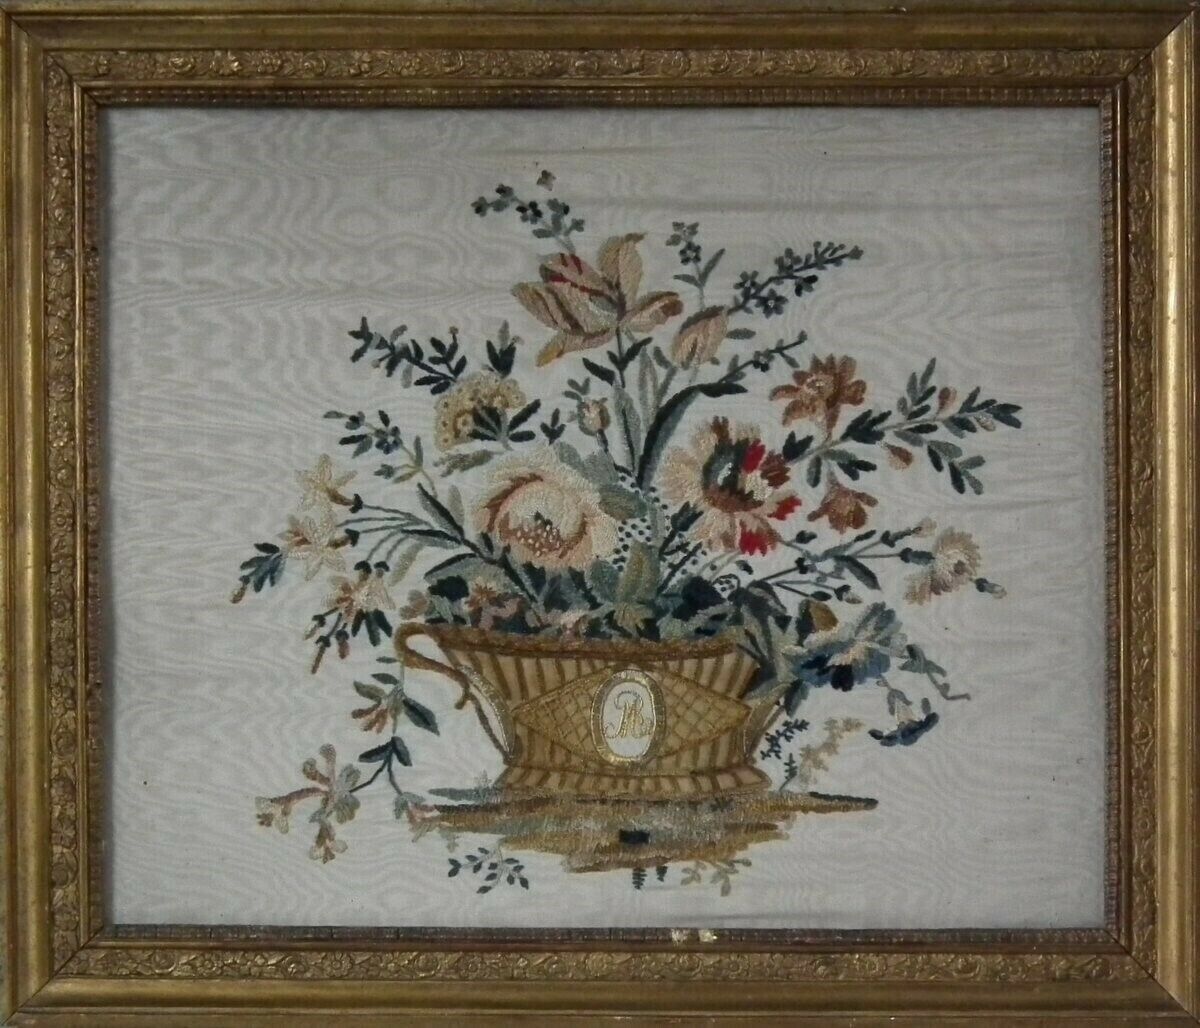 Early 19thC French Flowers in Basket Embroidery